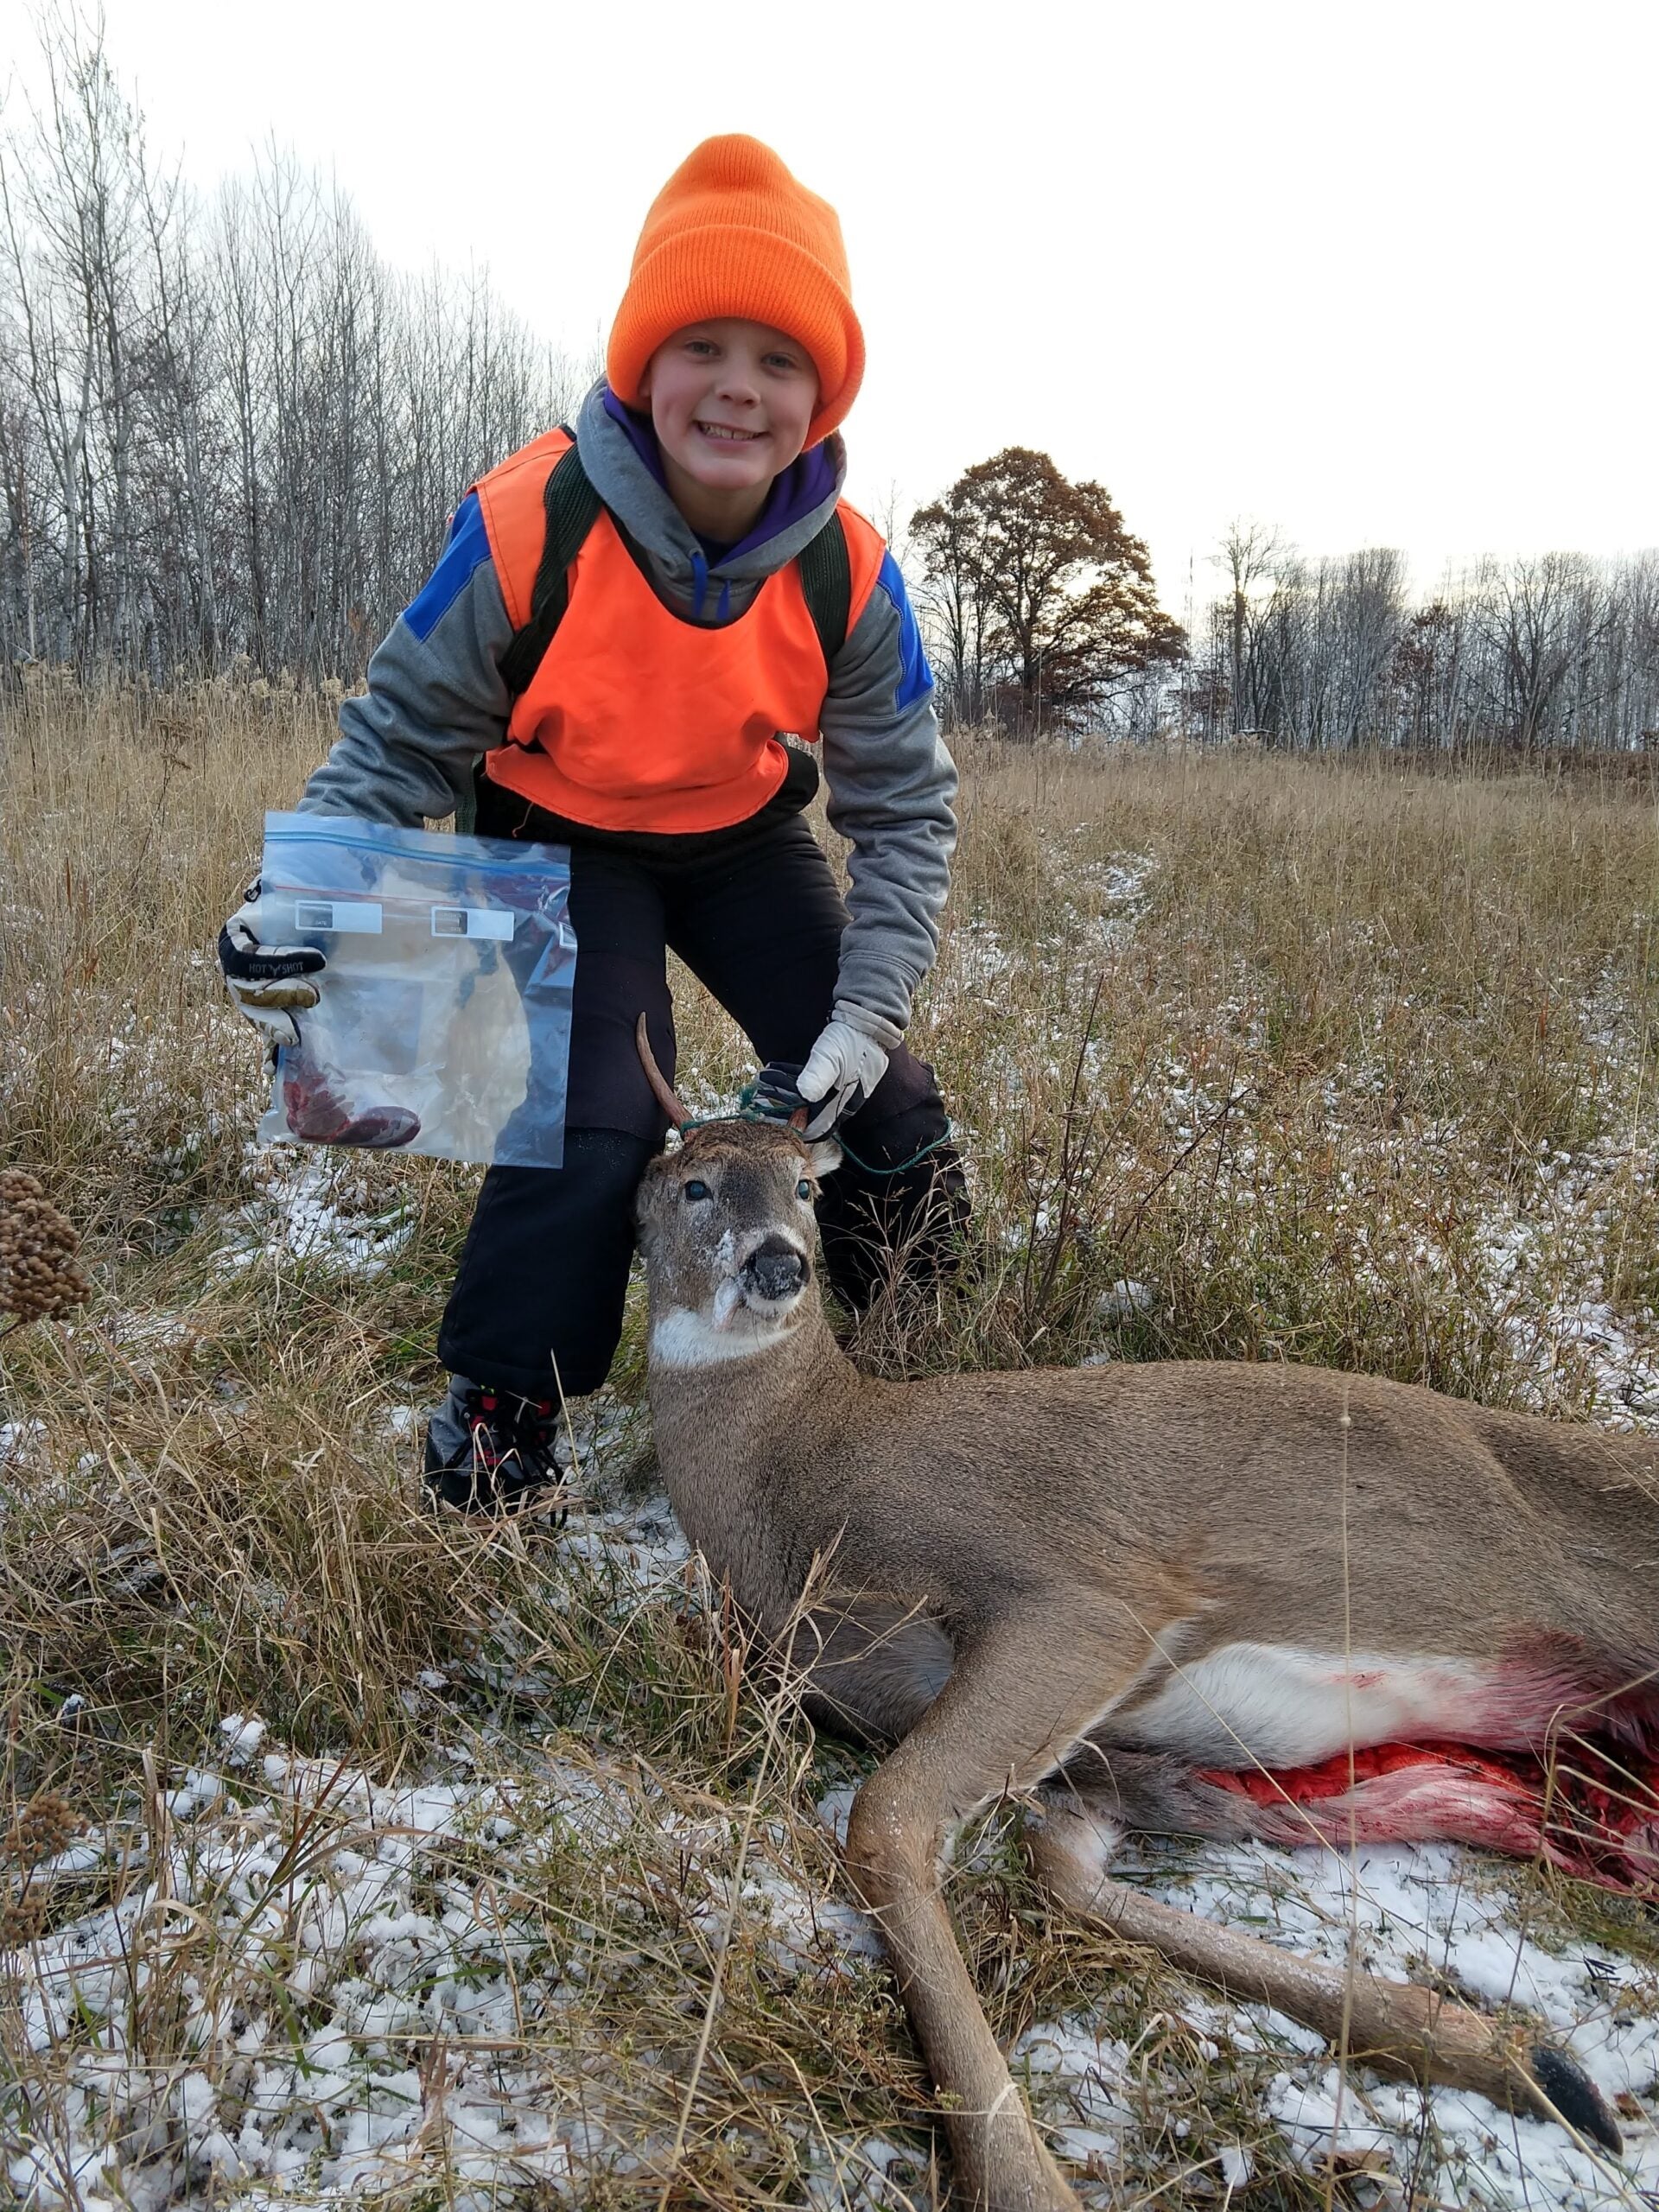 Biologists in Minnesota are Finding More Insecticides in Whitetail Deer Than Ever Before